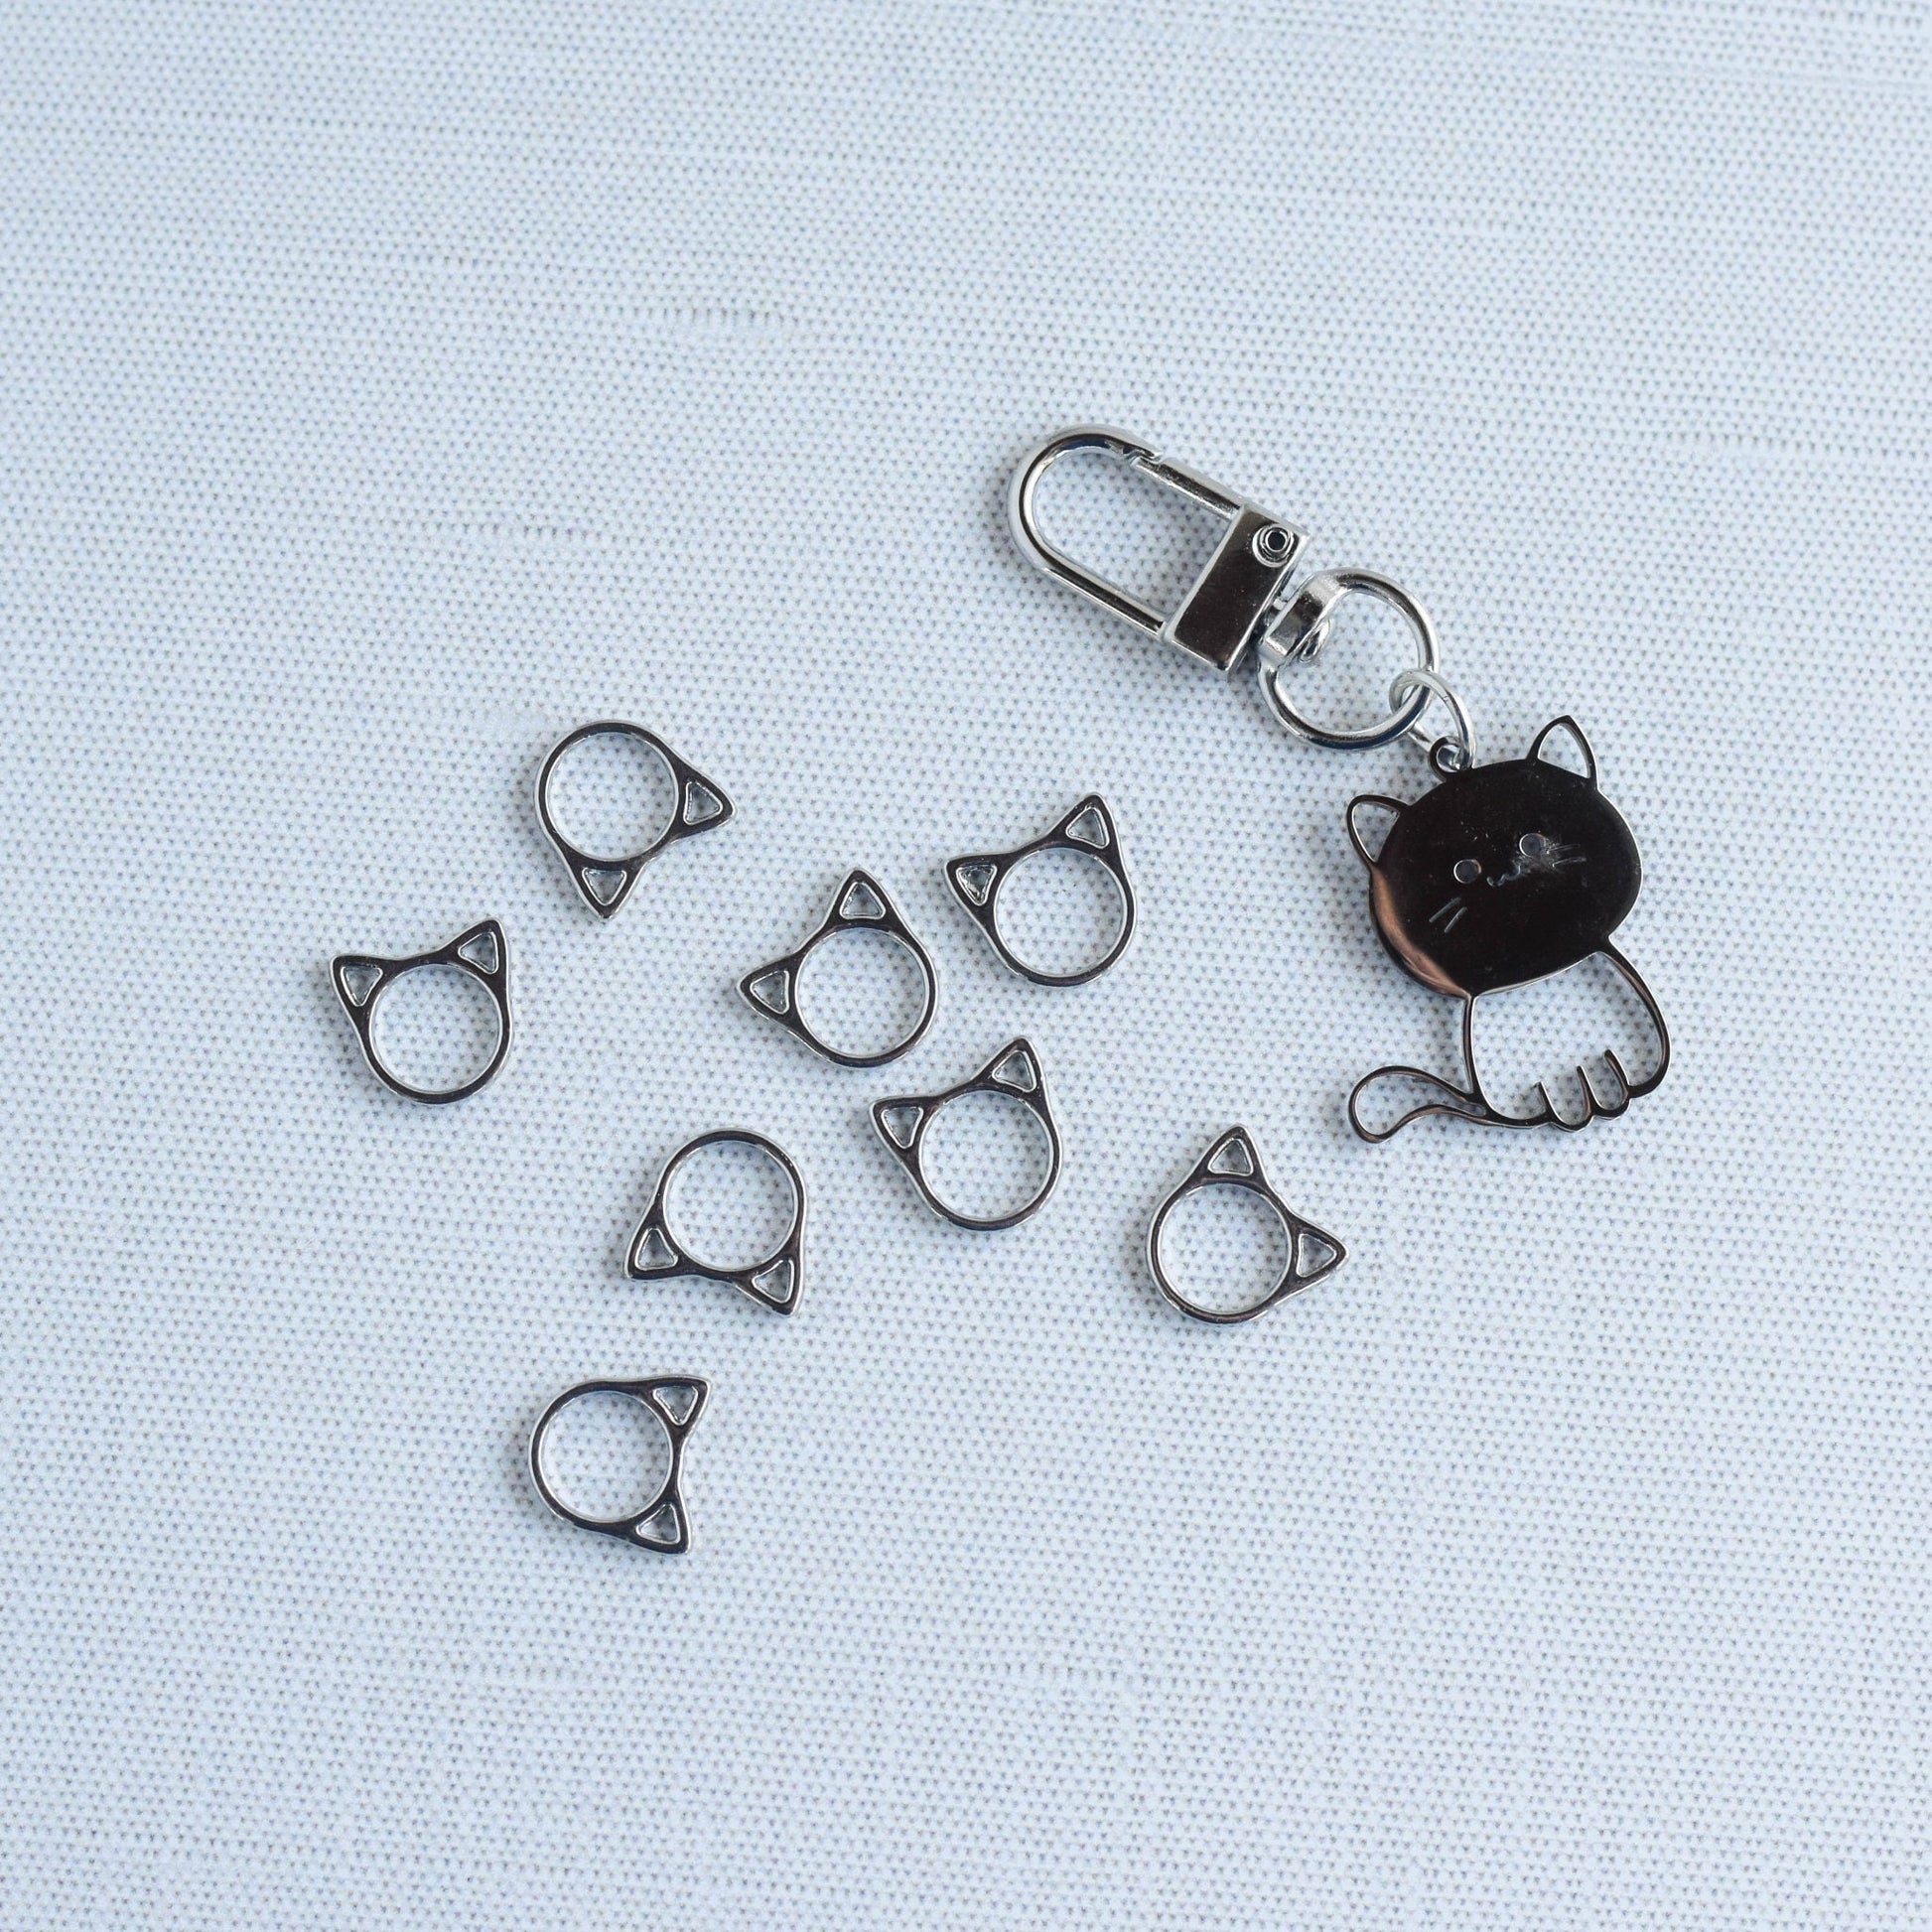 Set of 8 Cat Stitch Markers plus Holder, Cat Lover Stitch Markers, Snag Free Stitch Markers, Small Stitch Markers